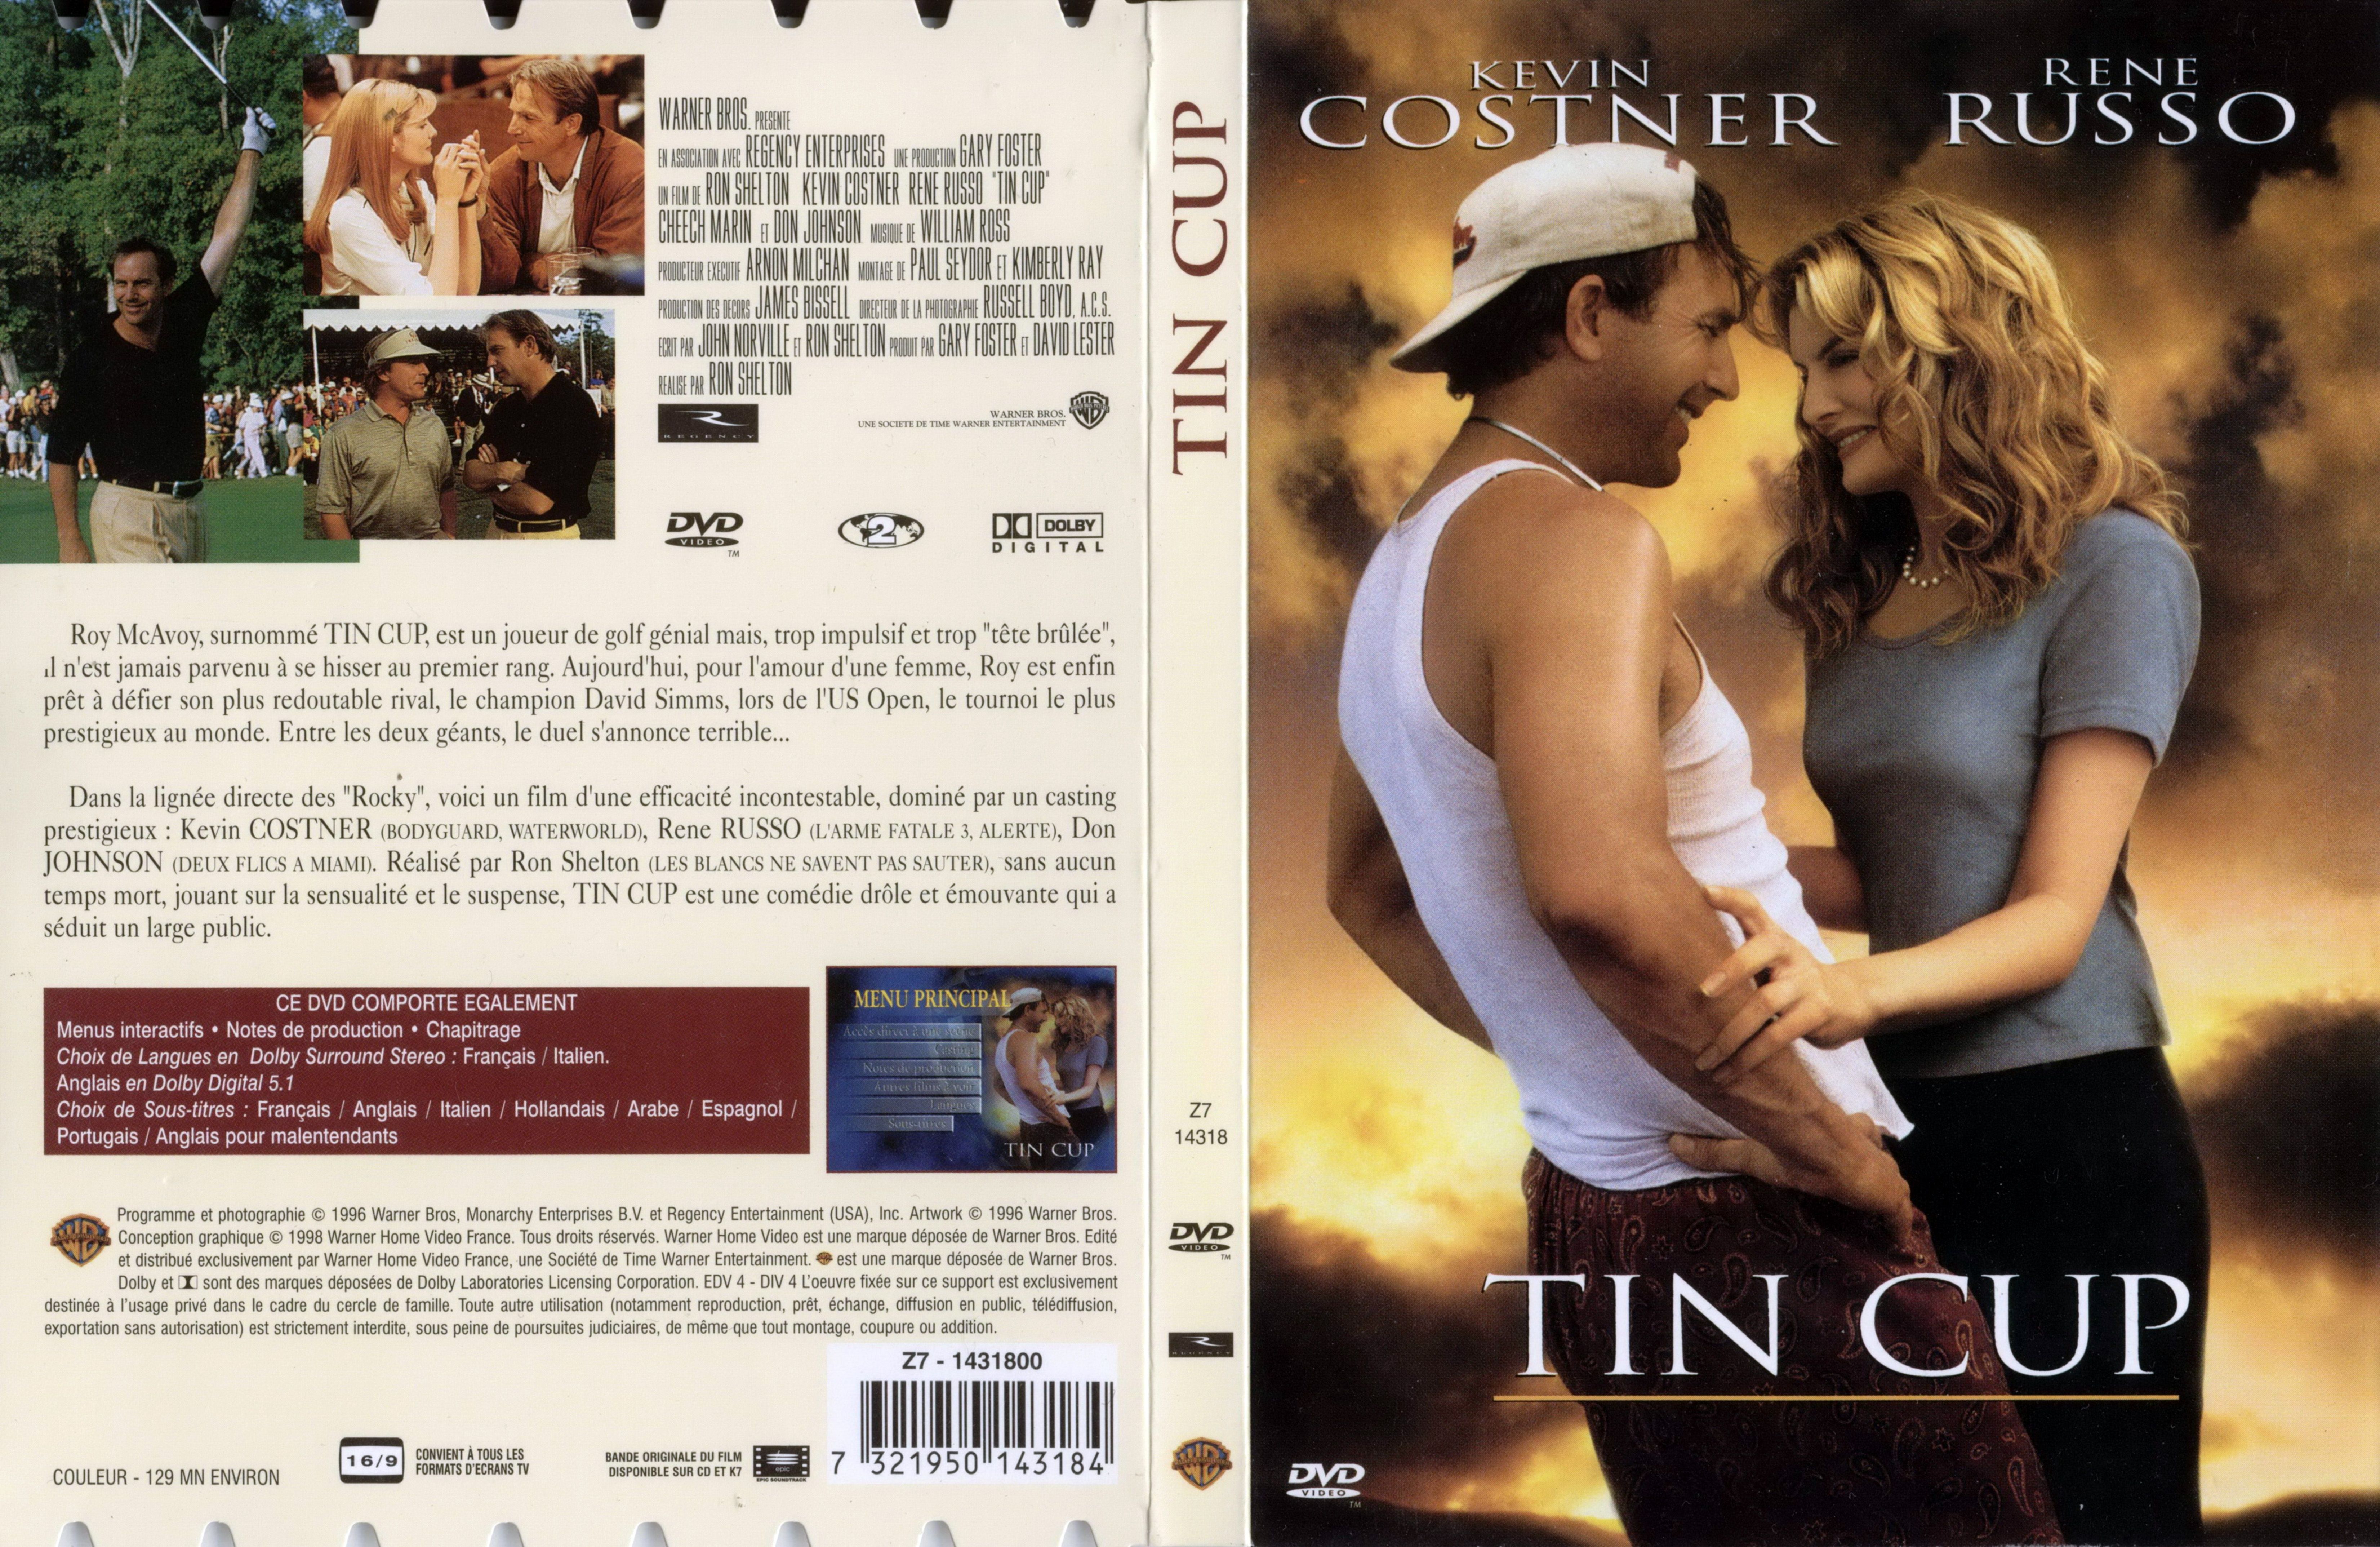 Jaquette DVD Tin cup